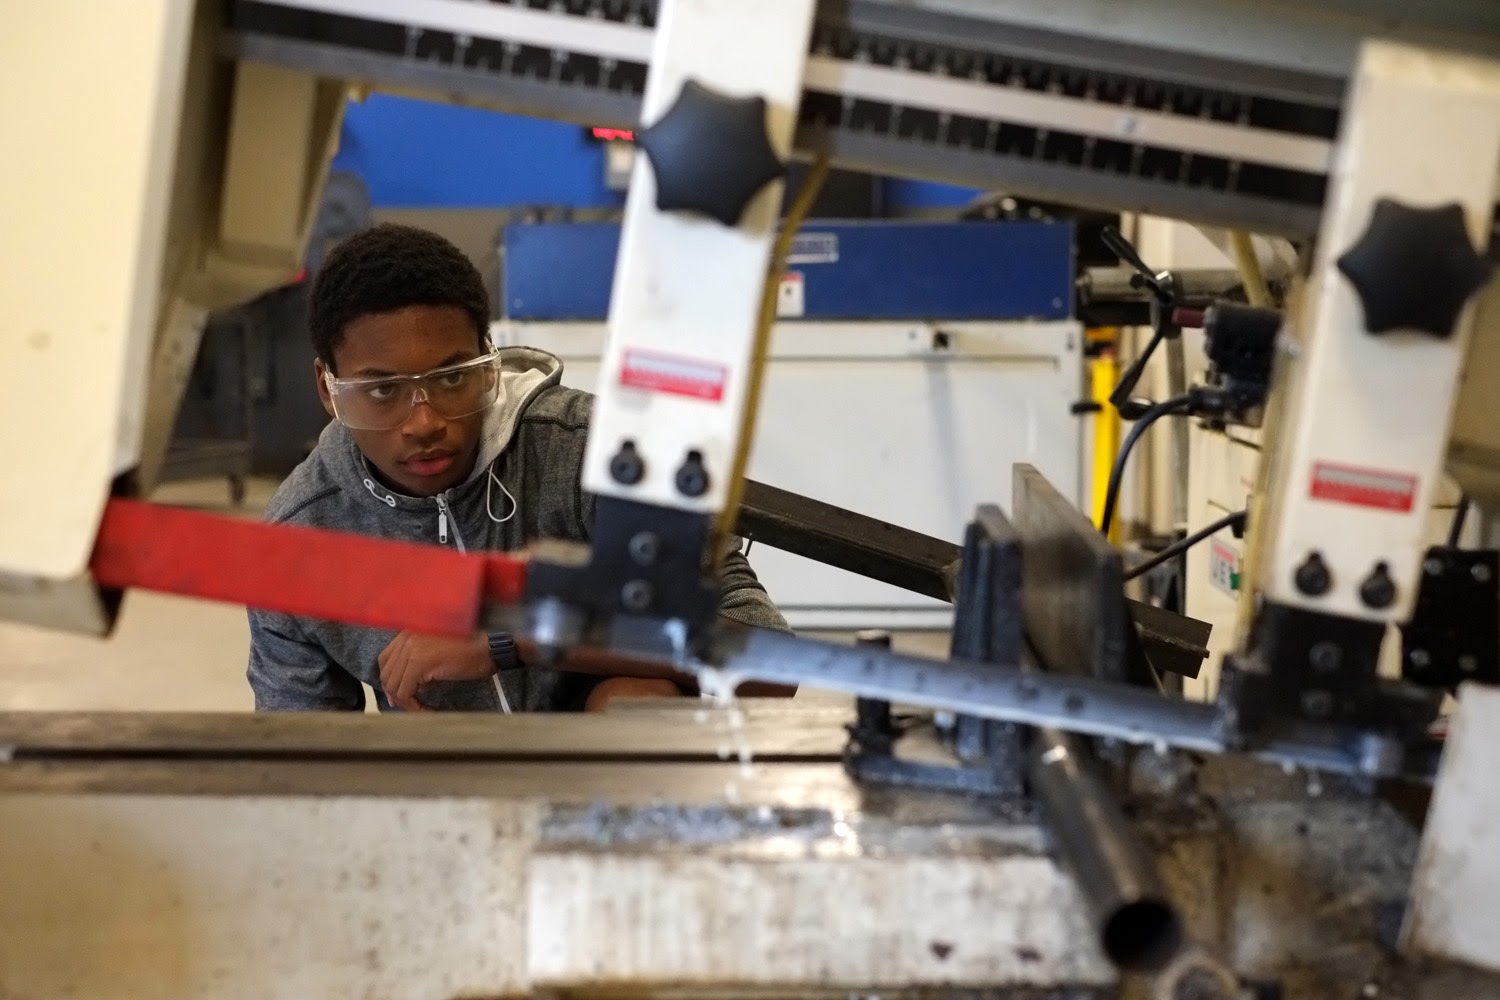 A high school student using fabrication equipment to build a prototype.